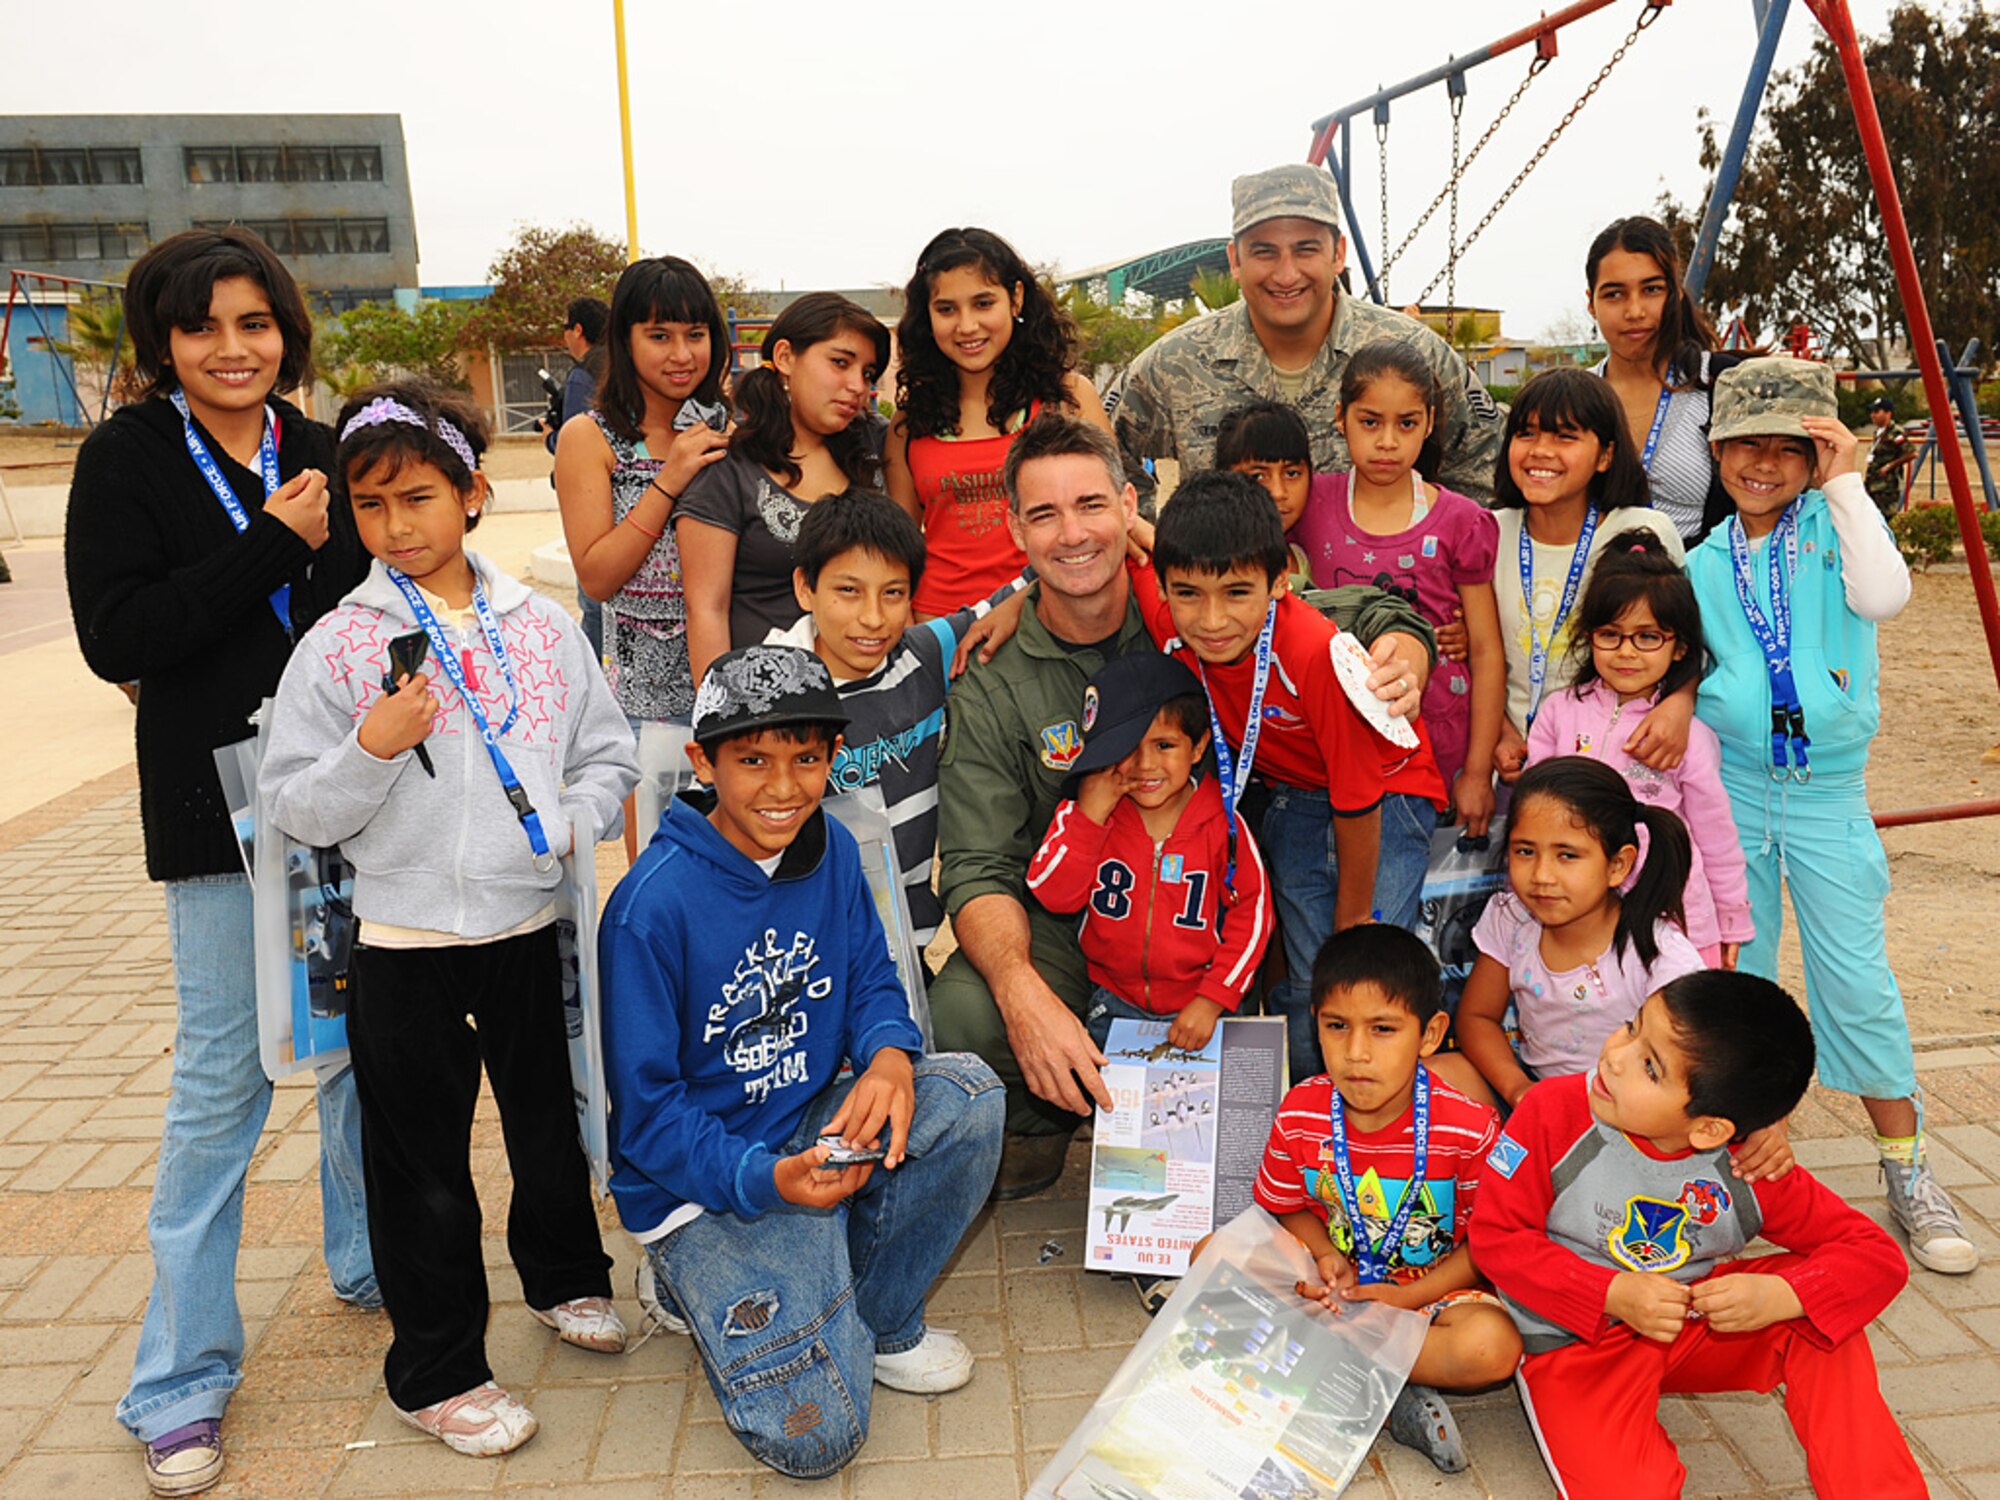 Col Roy Qualls, 159th Fighter Wing commander, and Master Sgt. David Quintero, an aircraft armament systems craftsman with the Louisiana Air National Guard pose with their new friends at the Aldeas SOS orphanage in Antofagasta, Chile.  The Airmen were part of a more than 40 person team of US, Chilean and Argentine Air Force members who visited the home for orphaned and abandoned children while taking time off from exercise SALITRE, a five-nation event focused on coalition interoperability during peacekeeping operations. (U.S. Air Force photo by Master Sgt. Daniel Farrell)